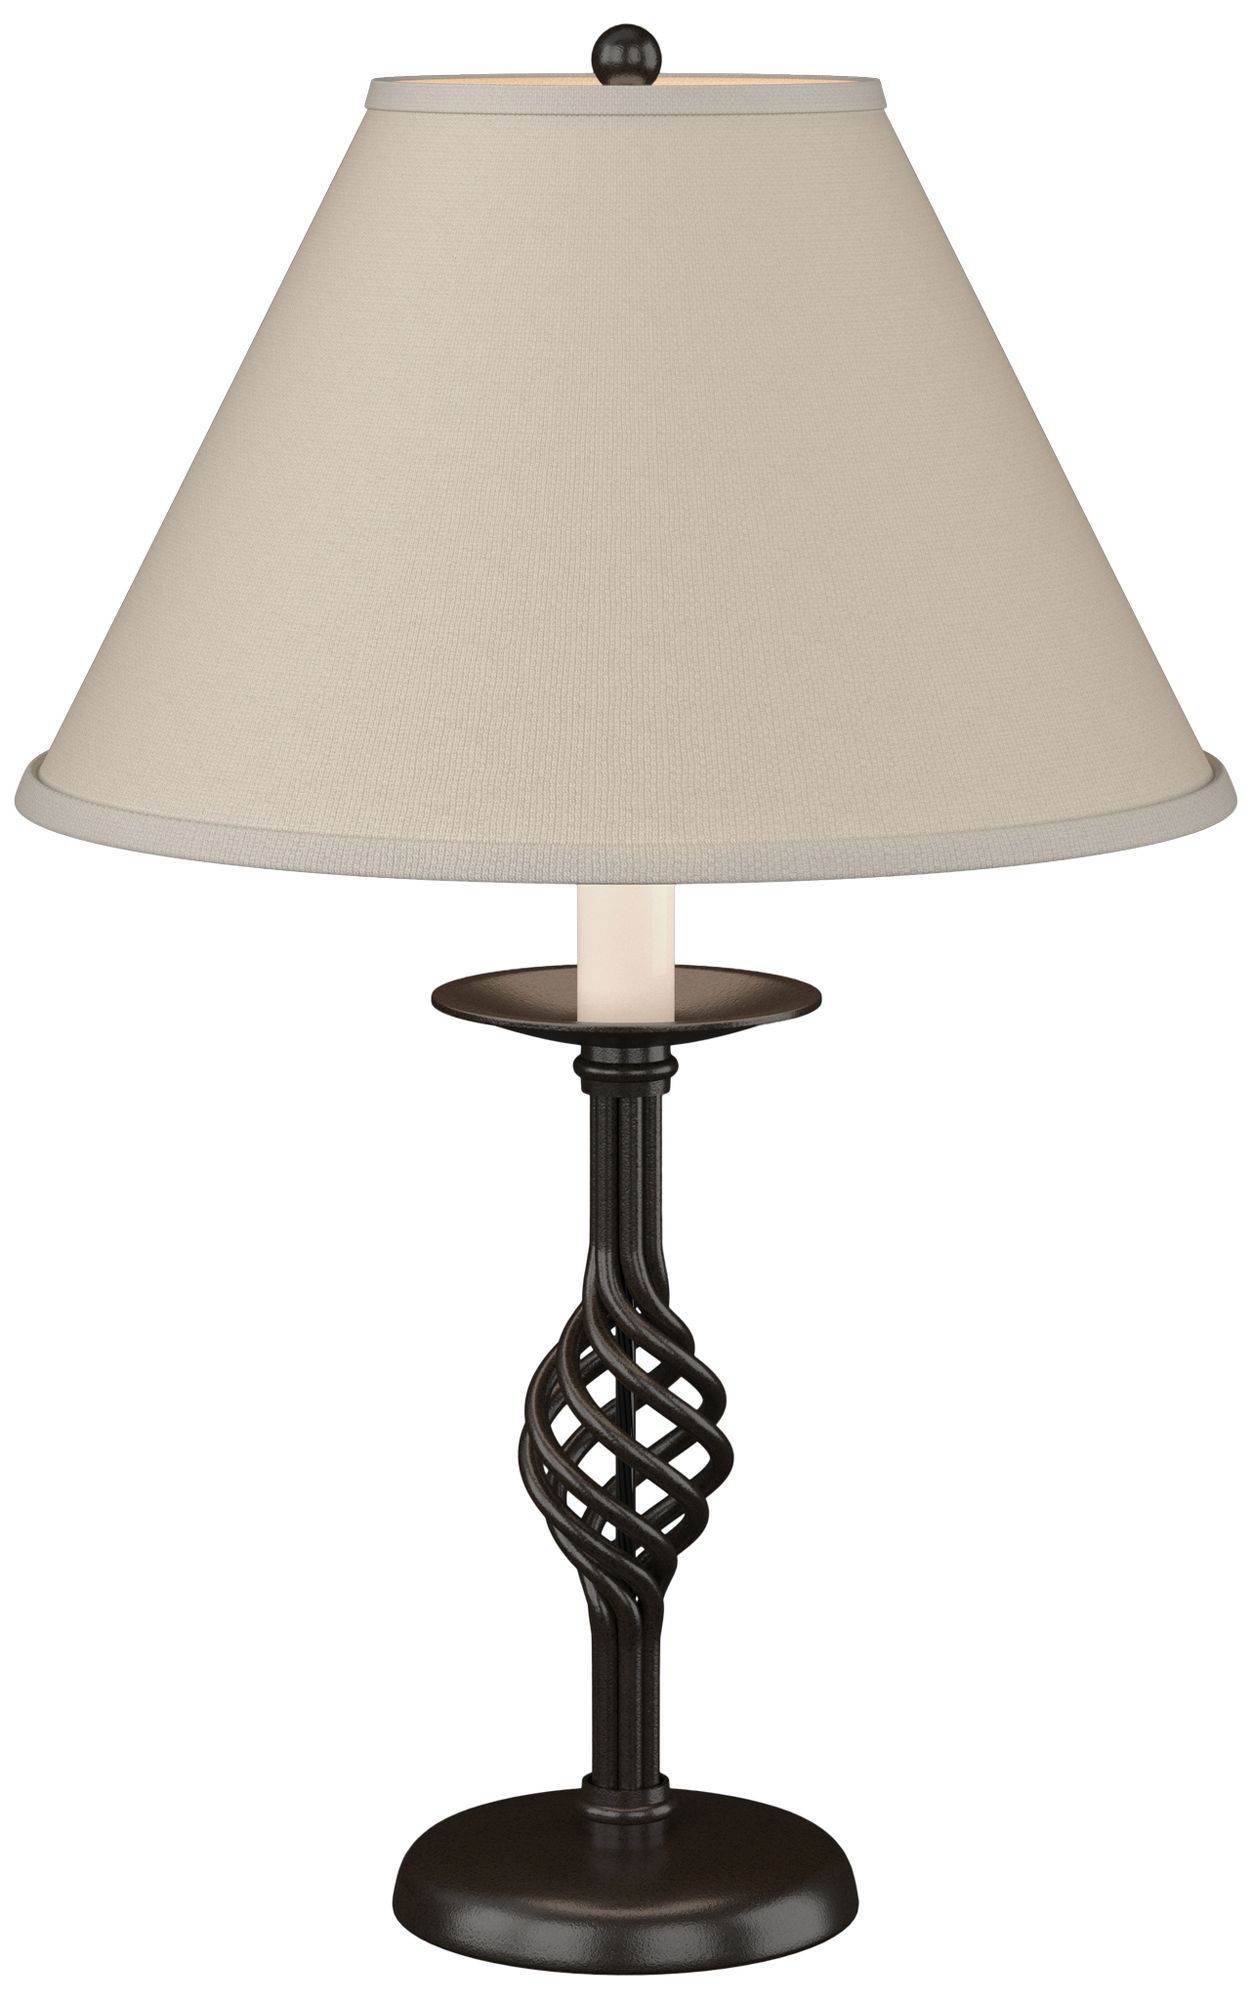 Twist Basket 25.5"H Oil Rubbed Bronze Table Lamp w/ Linen Shade